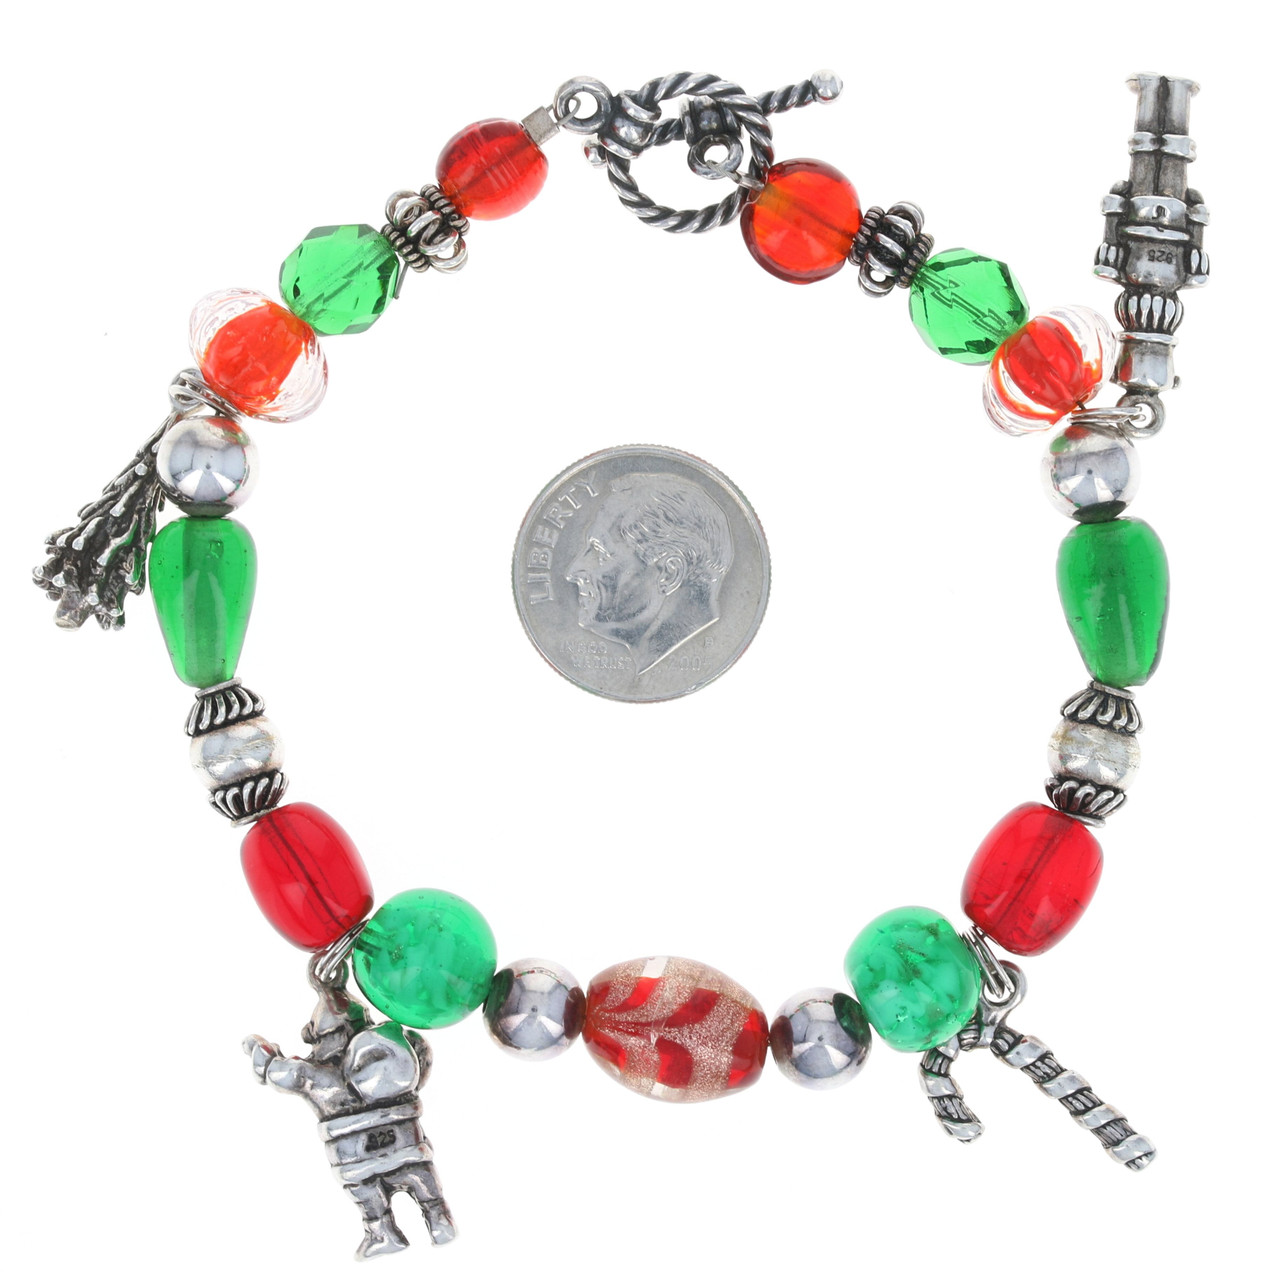 Vintage Charms Christmas in July Charm Bracelet